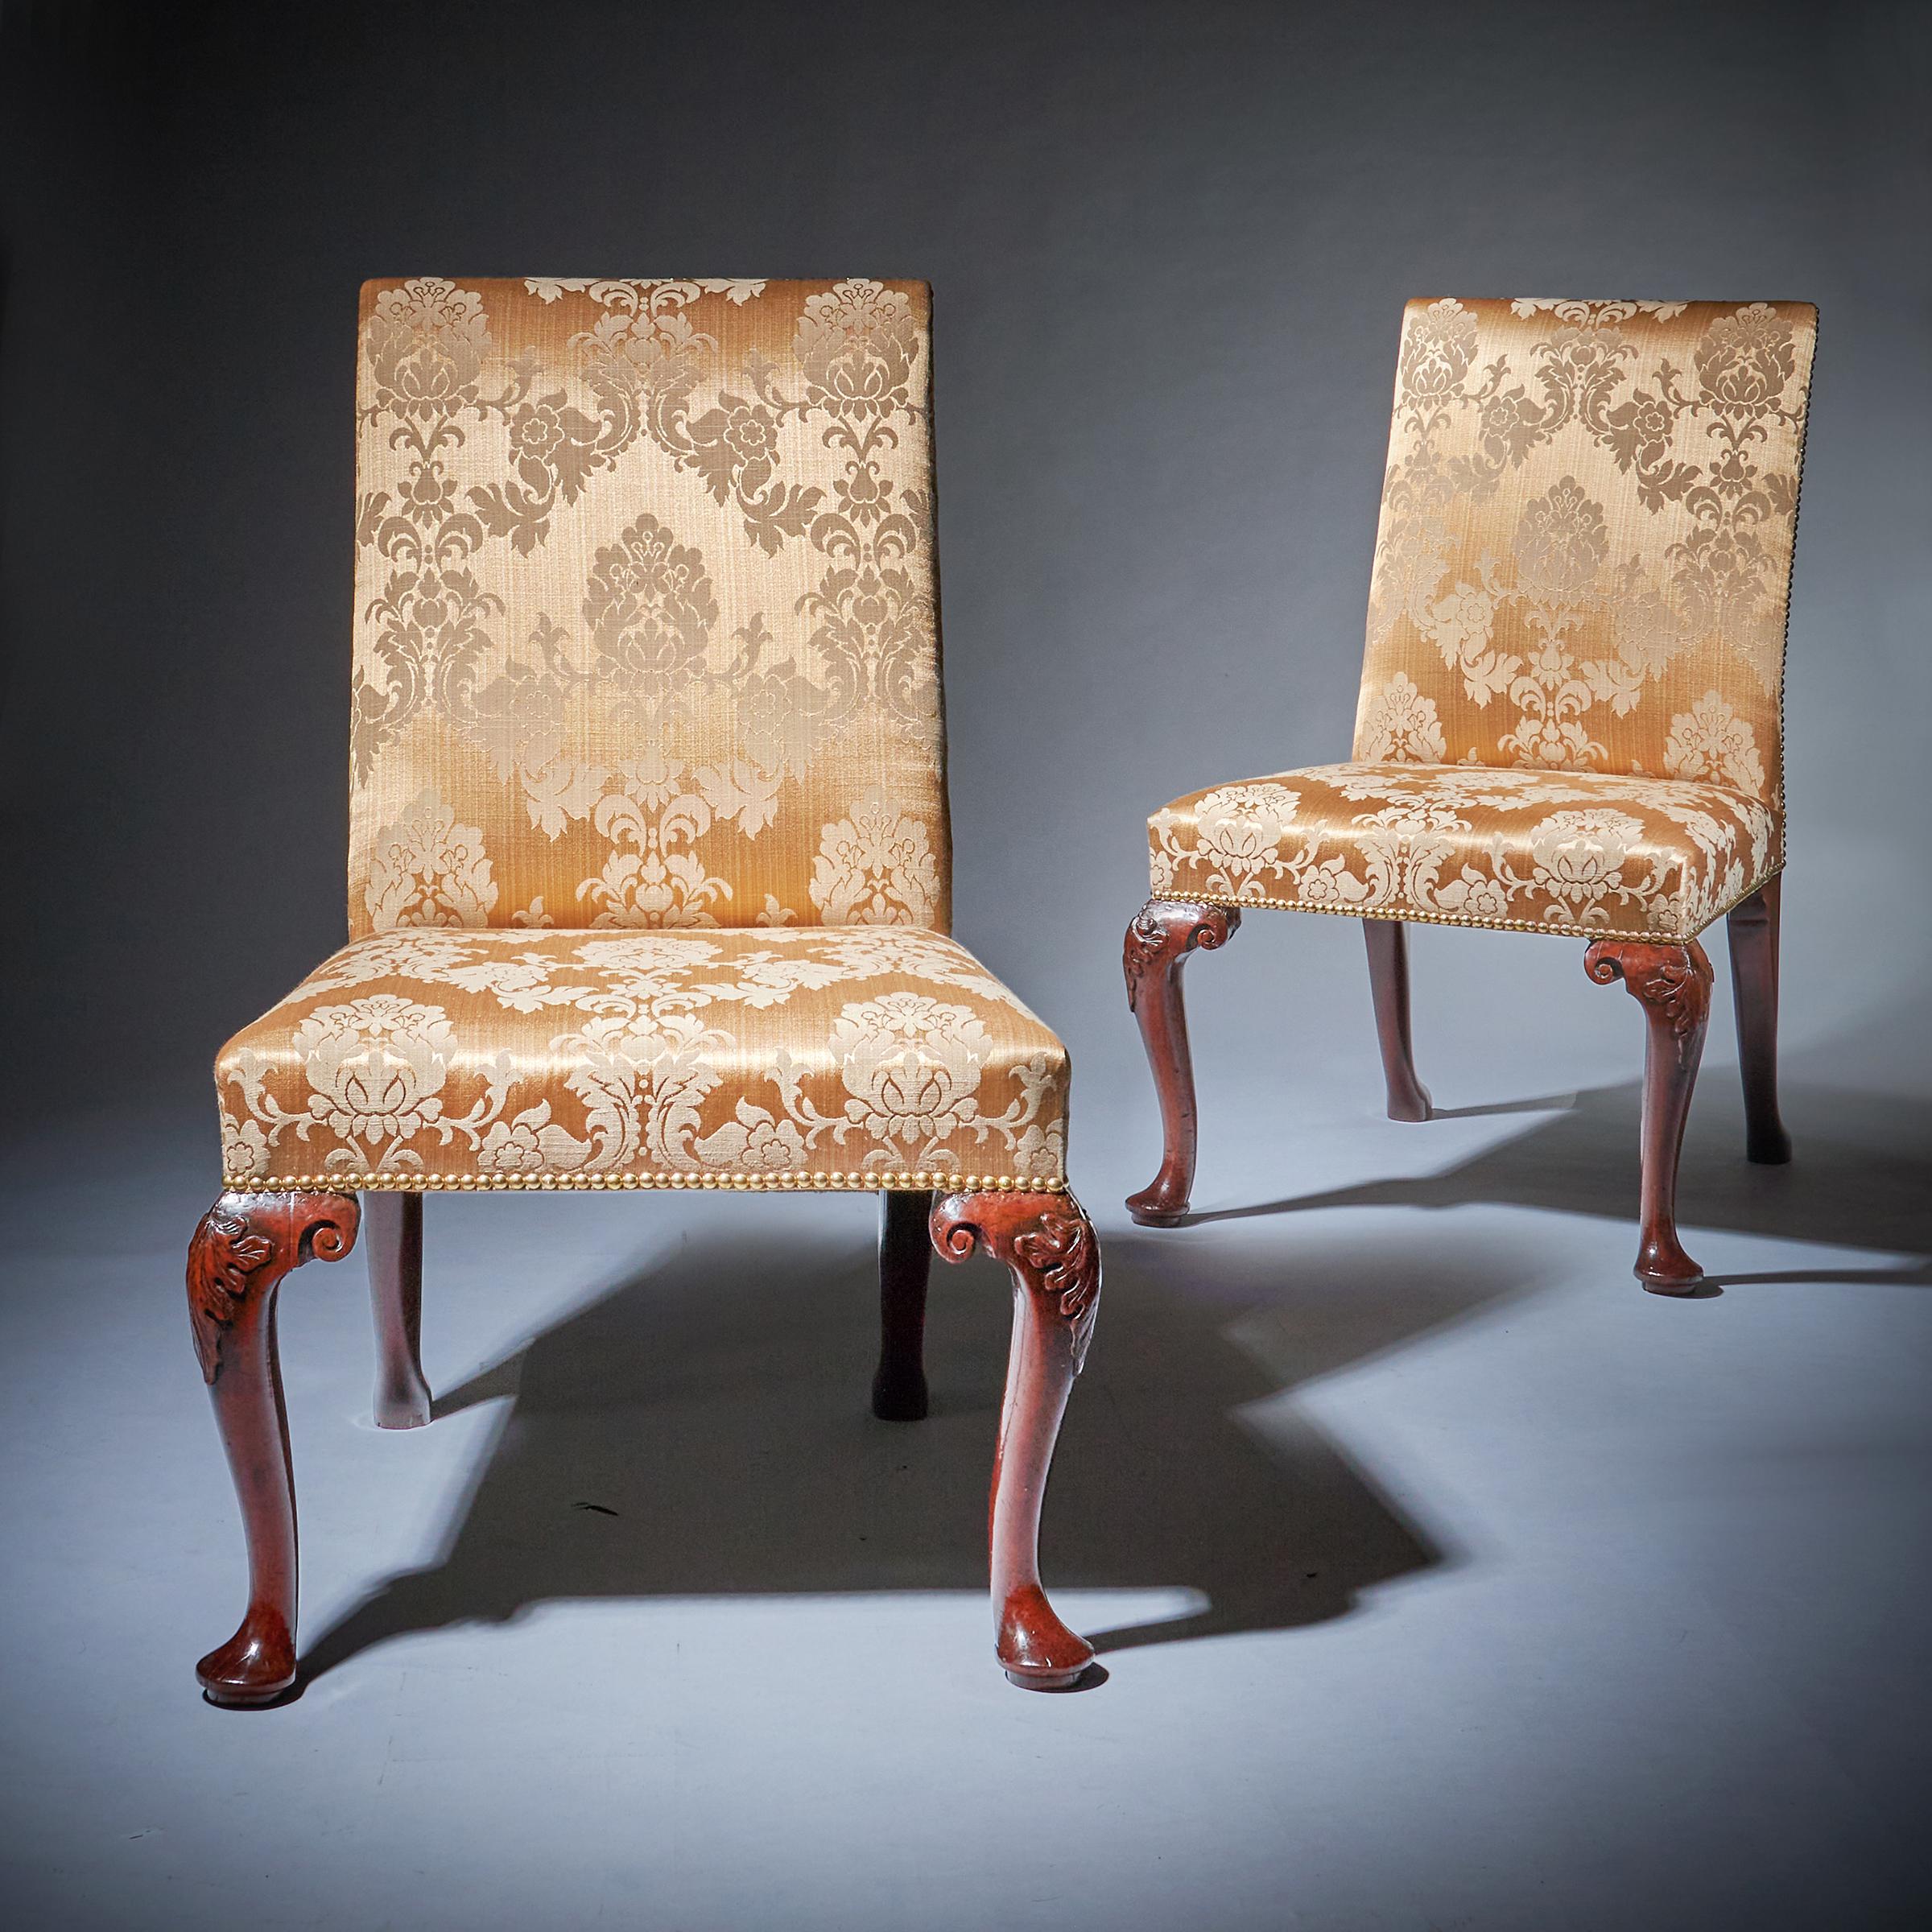 A very attractive and rare pair of 18th century George II mahogany side chairs, circa 1730-1740. England

The high rectangular backs and seats are upholstered in light gold Damask close nailed to beech frames and raised on cabriole legs carved to